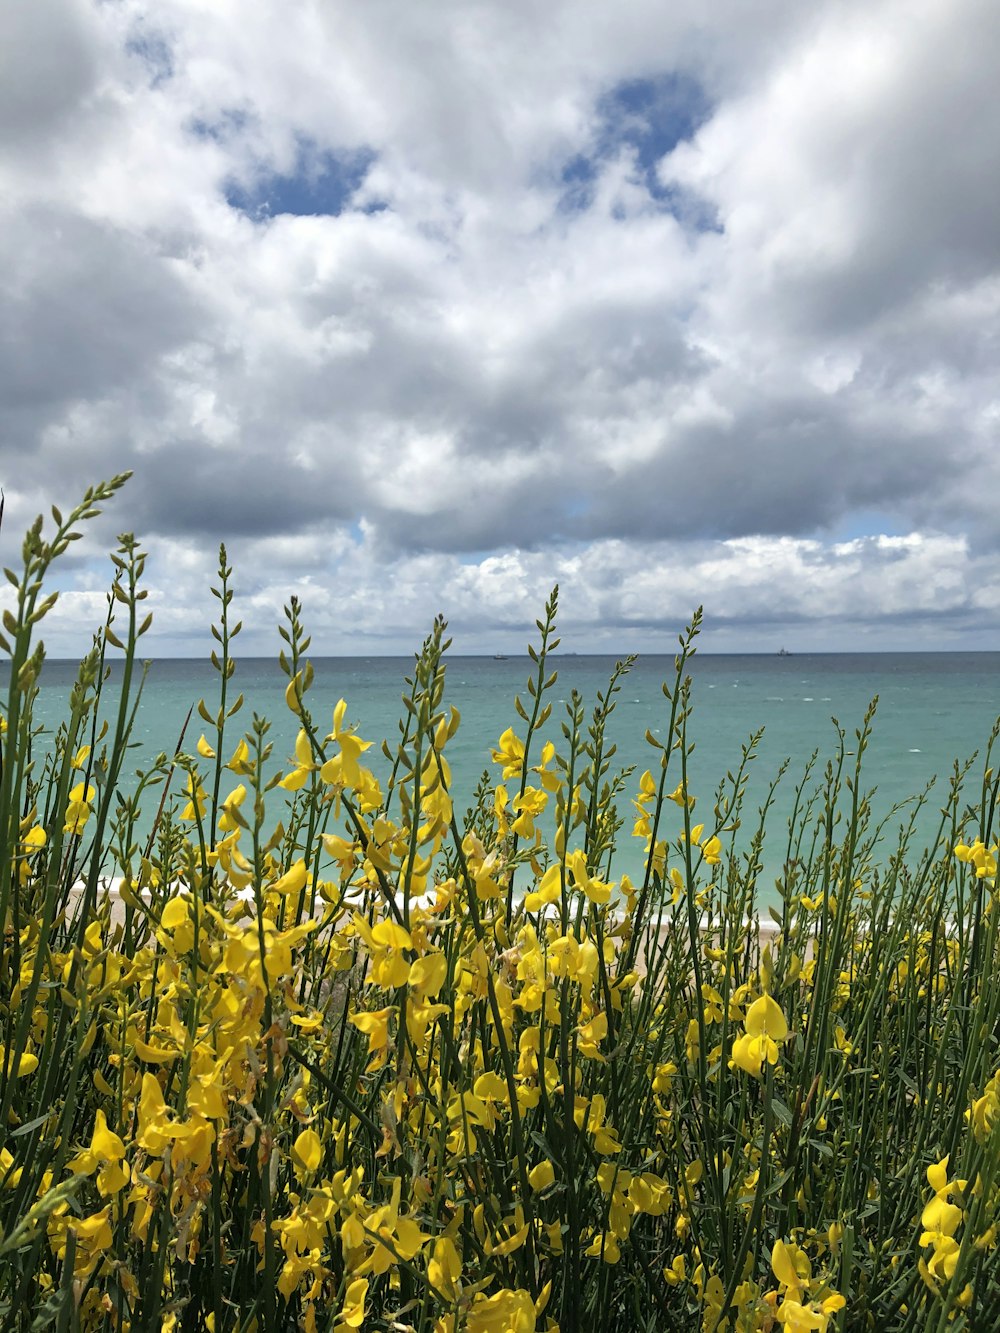 yellow flower field near sea under white clouds and blue sky during daytime